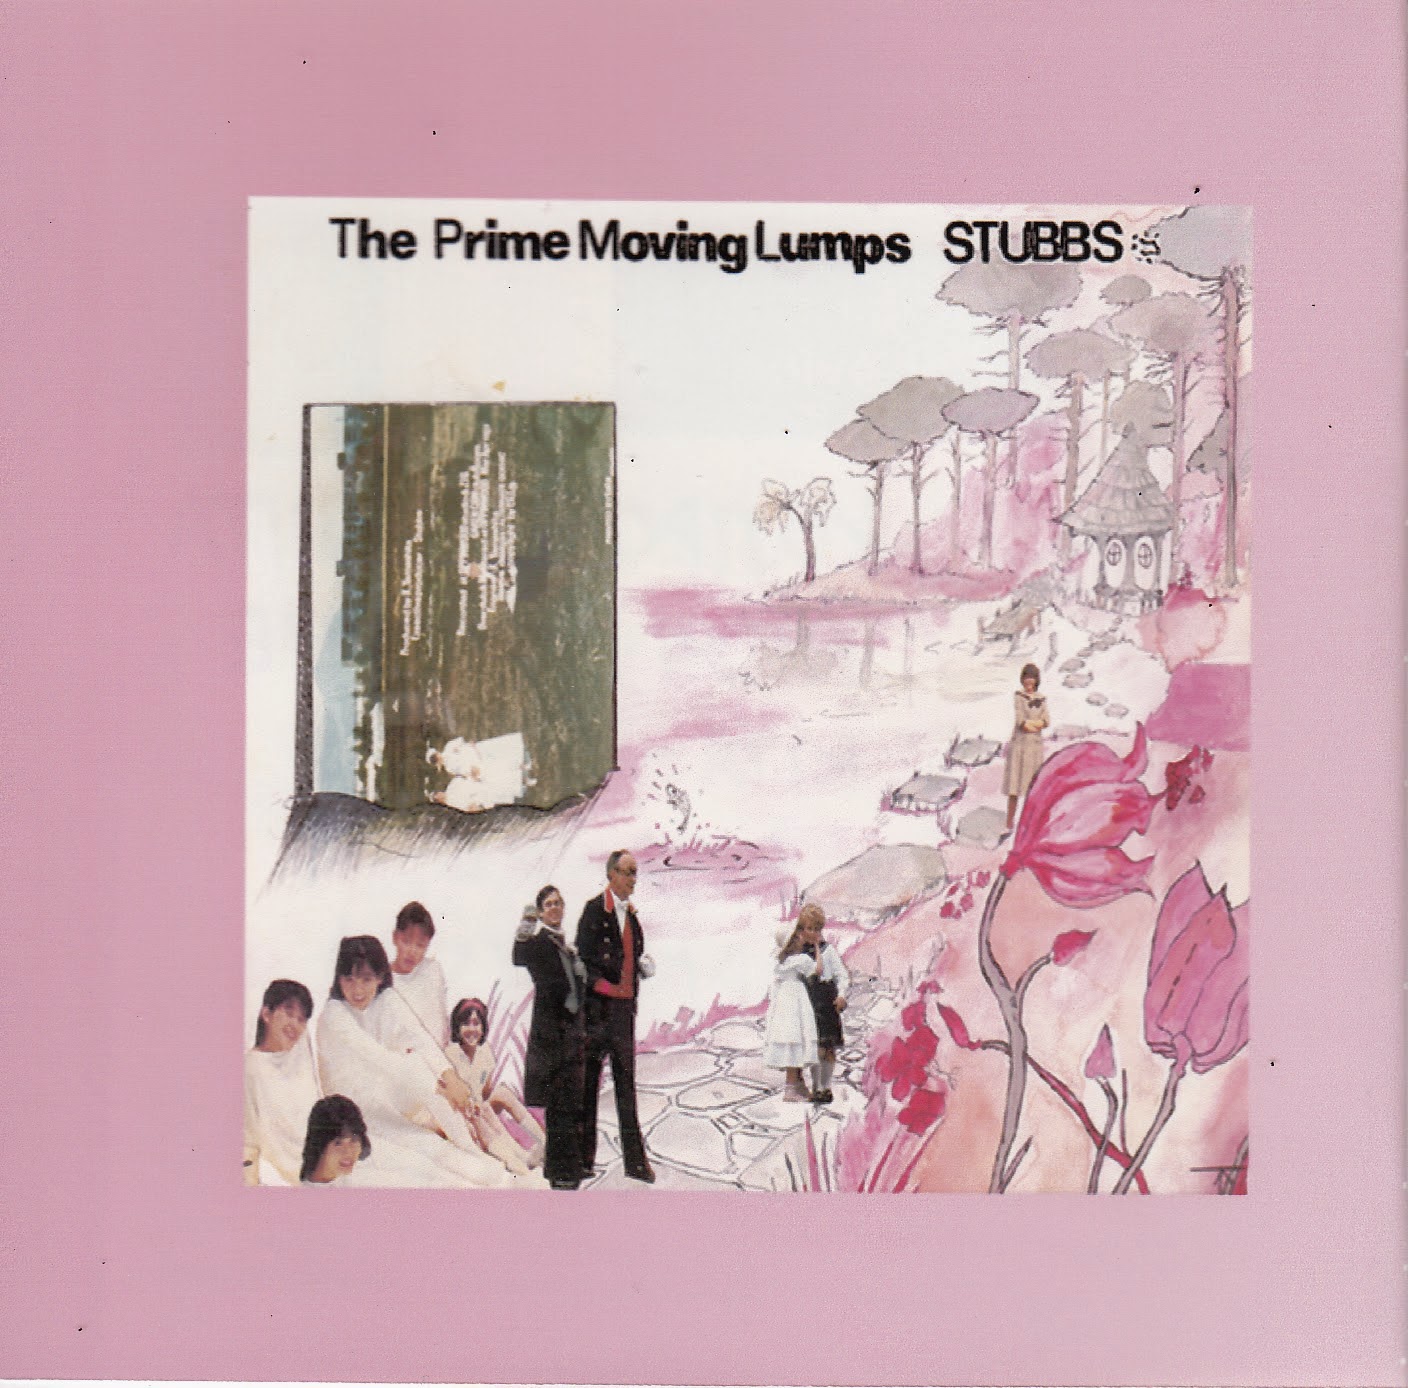 STUBBS - The Prime Moving Lumps cover 